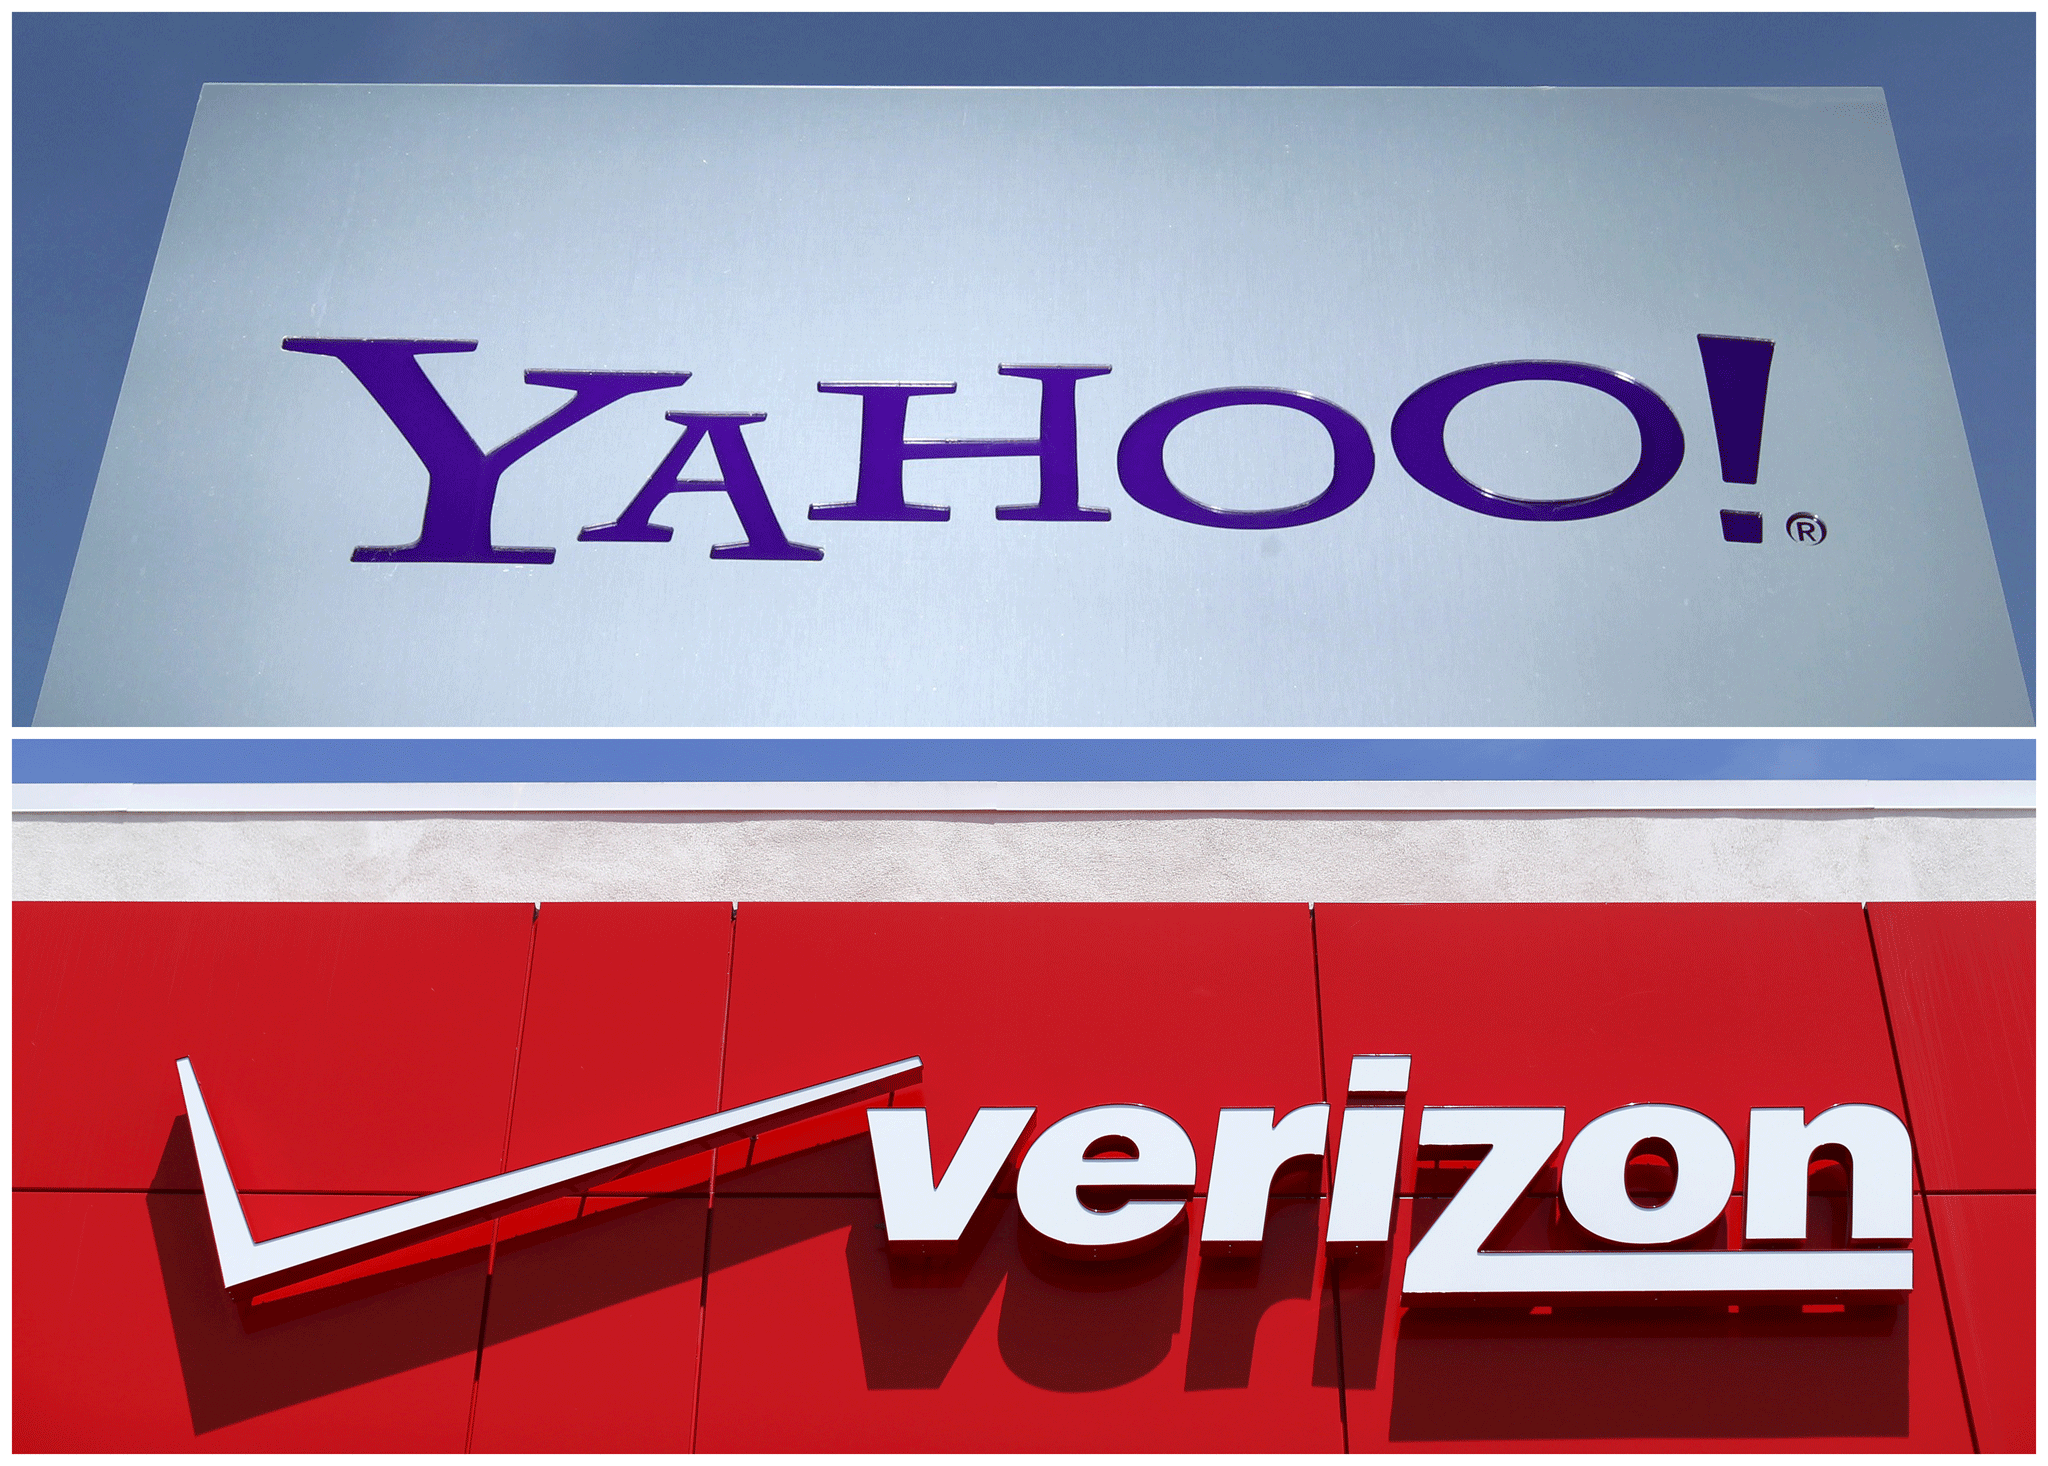 Yahoo has accepted a $350m discount after a vast breach of customer data raised concerns about its security procedures